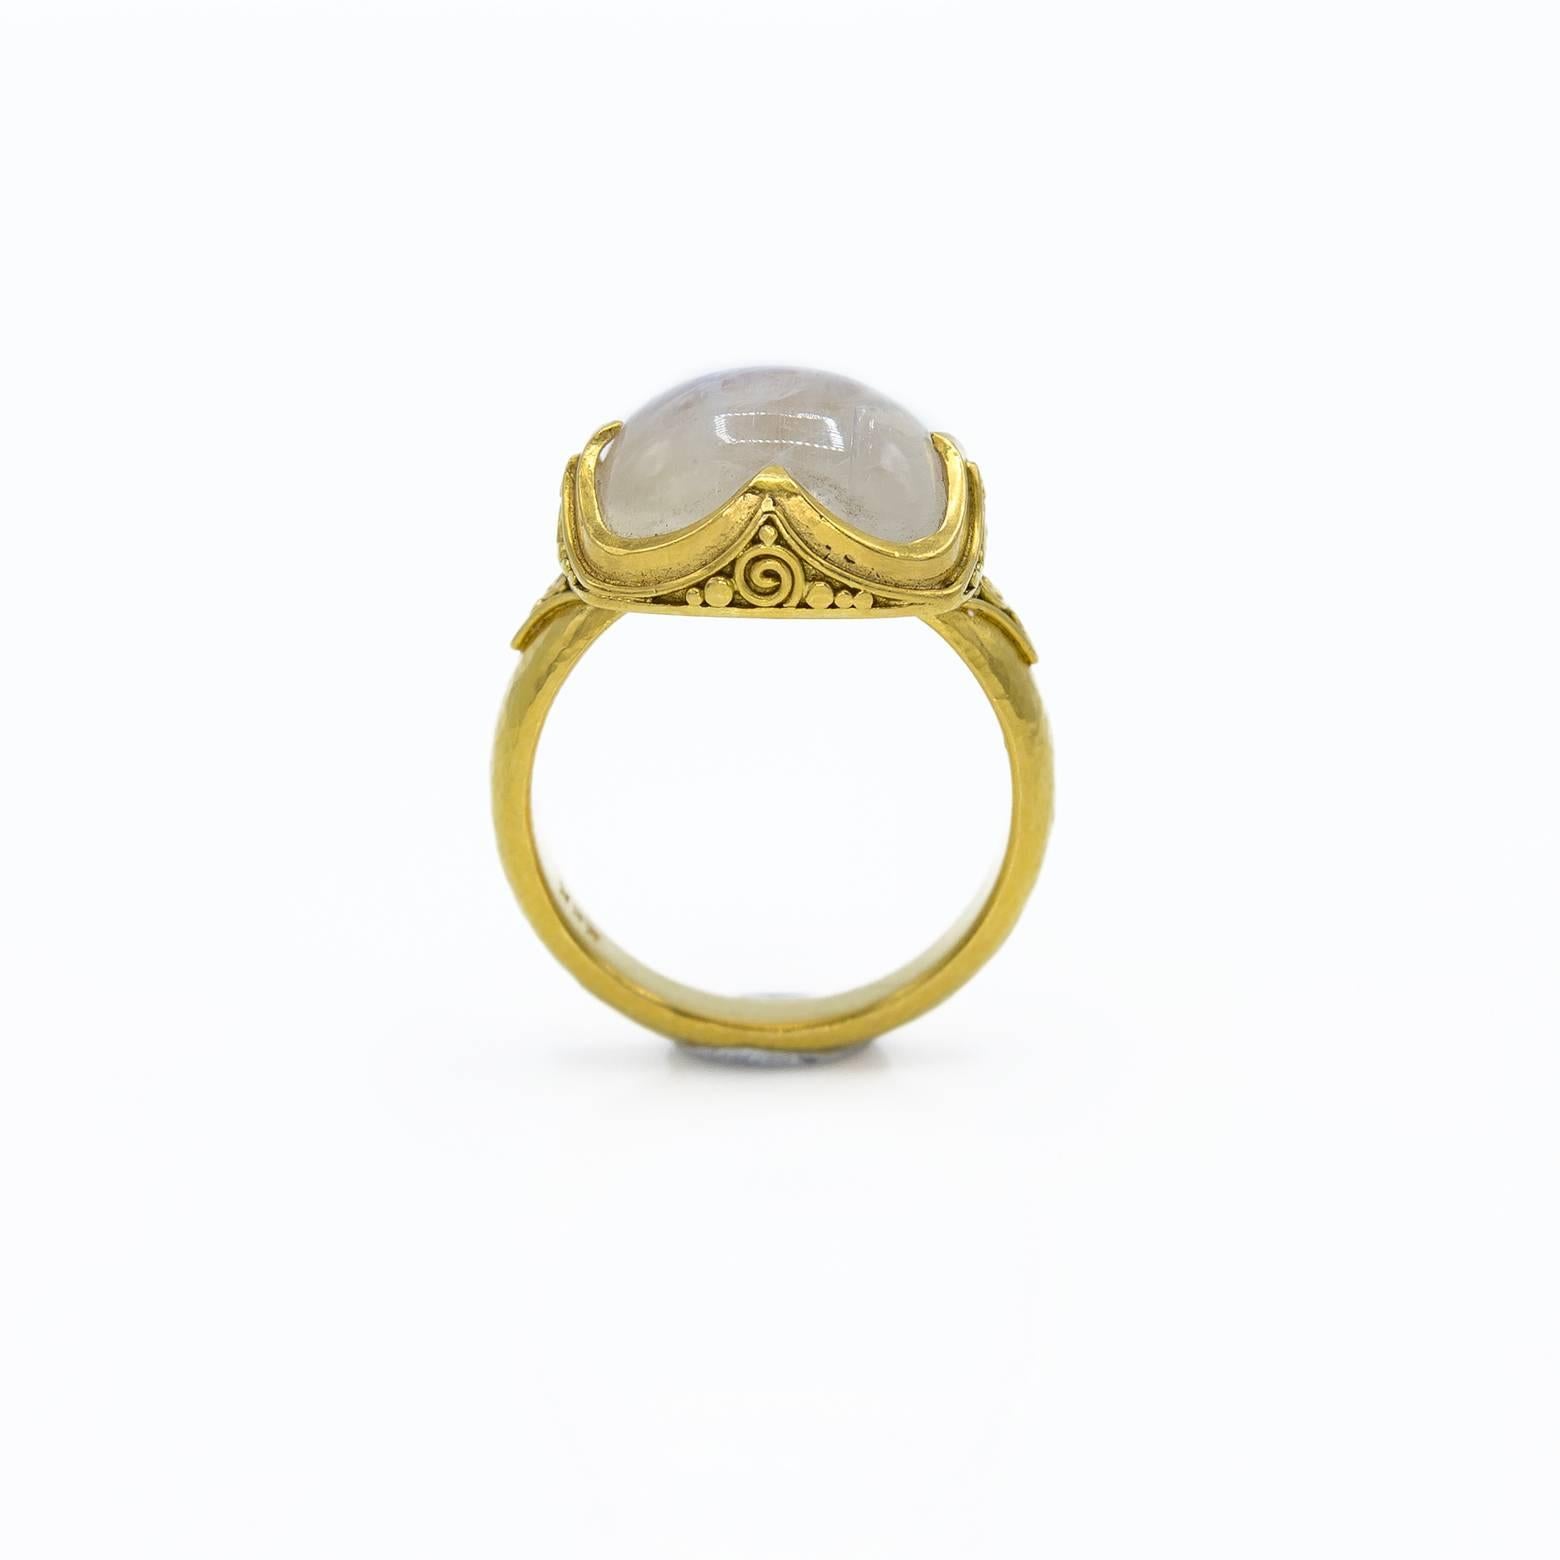 This stunning ring has detailing that perfectly showcases the beauty of the fiery moonstone. The band is hammered to bring out the warm glow of the 22k gold. The size is 5 3/4.  